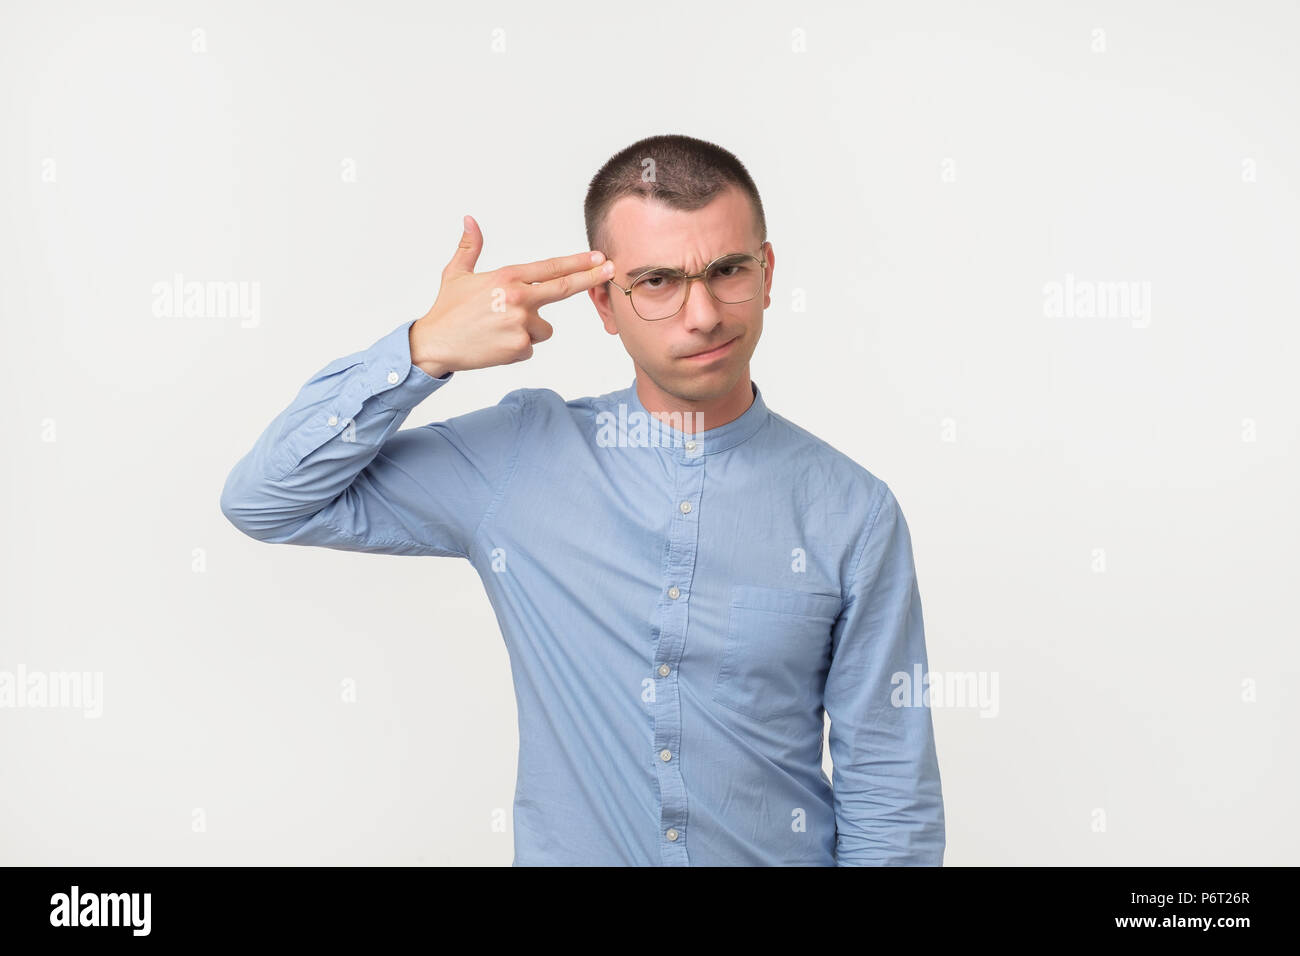 Tired or bored hispanic guy holding gun gesture near temples and making faces while standing over gray background. Stock Photo